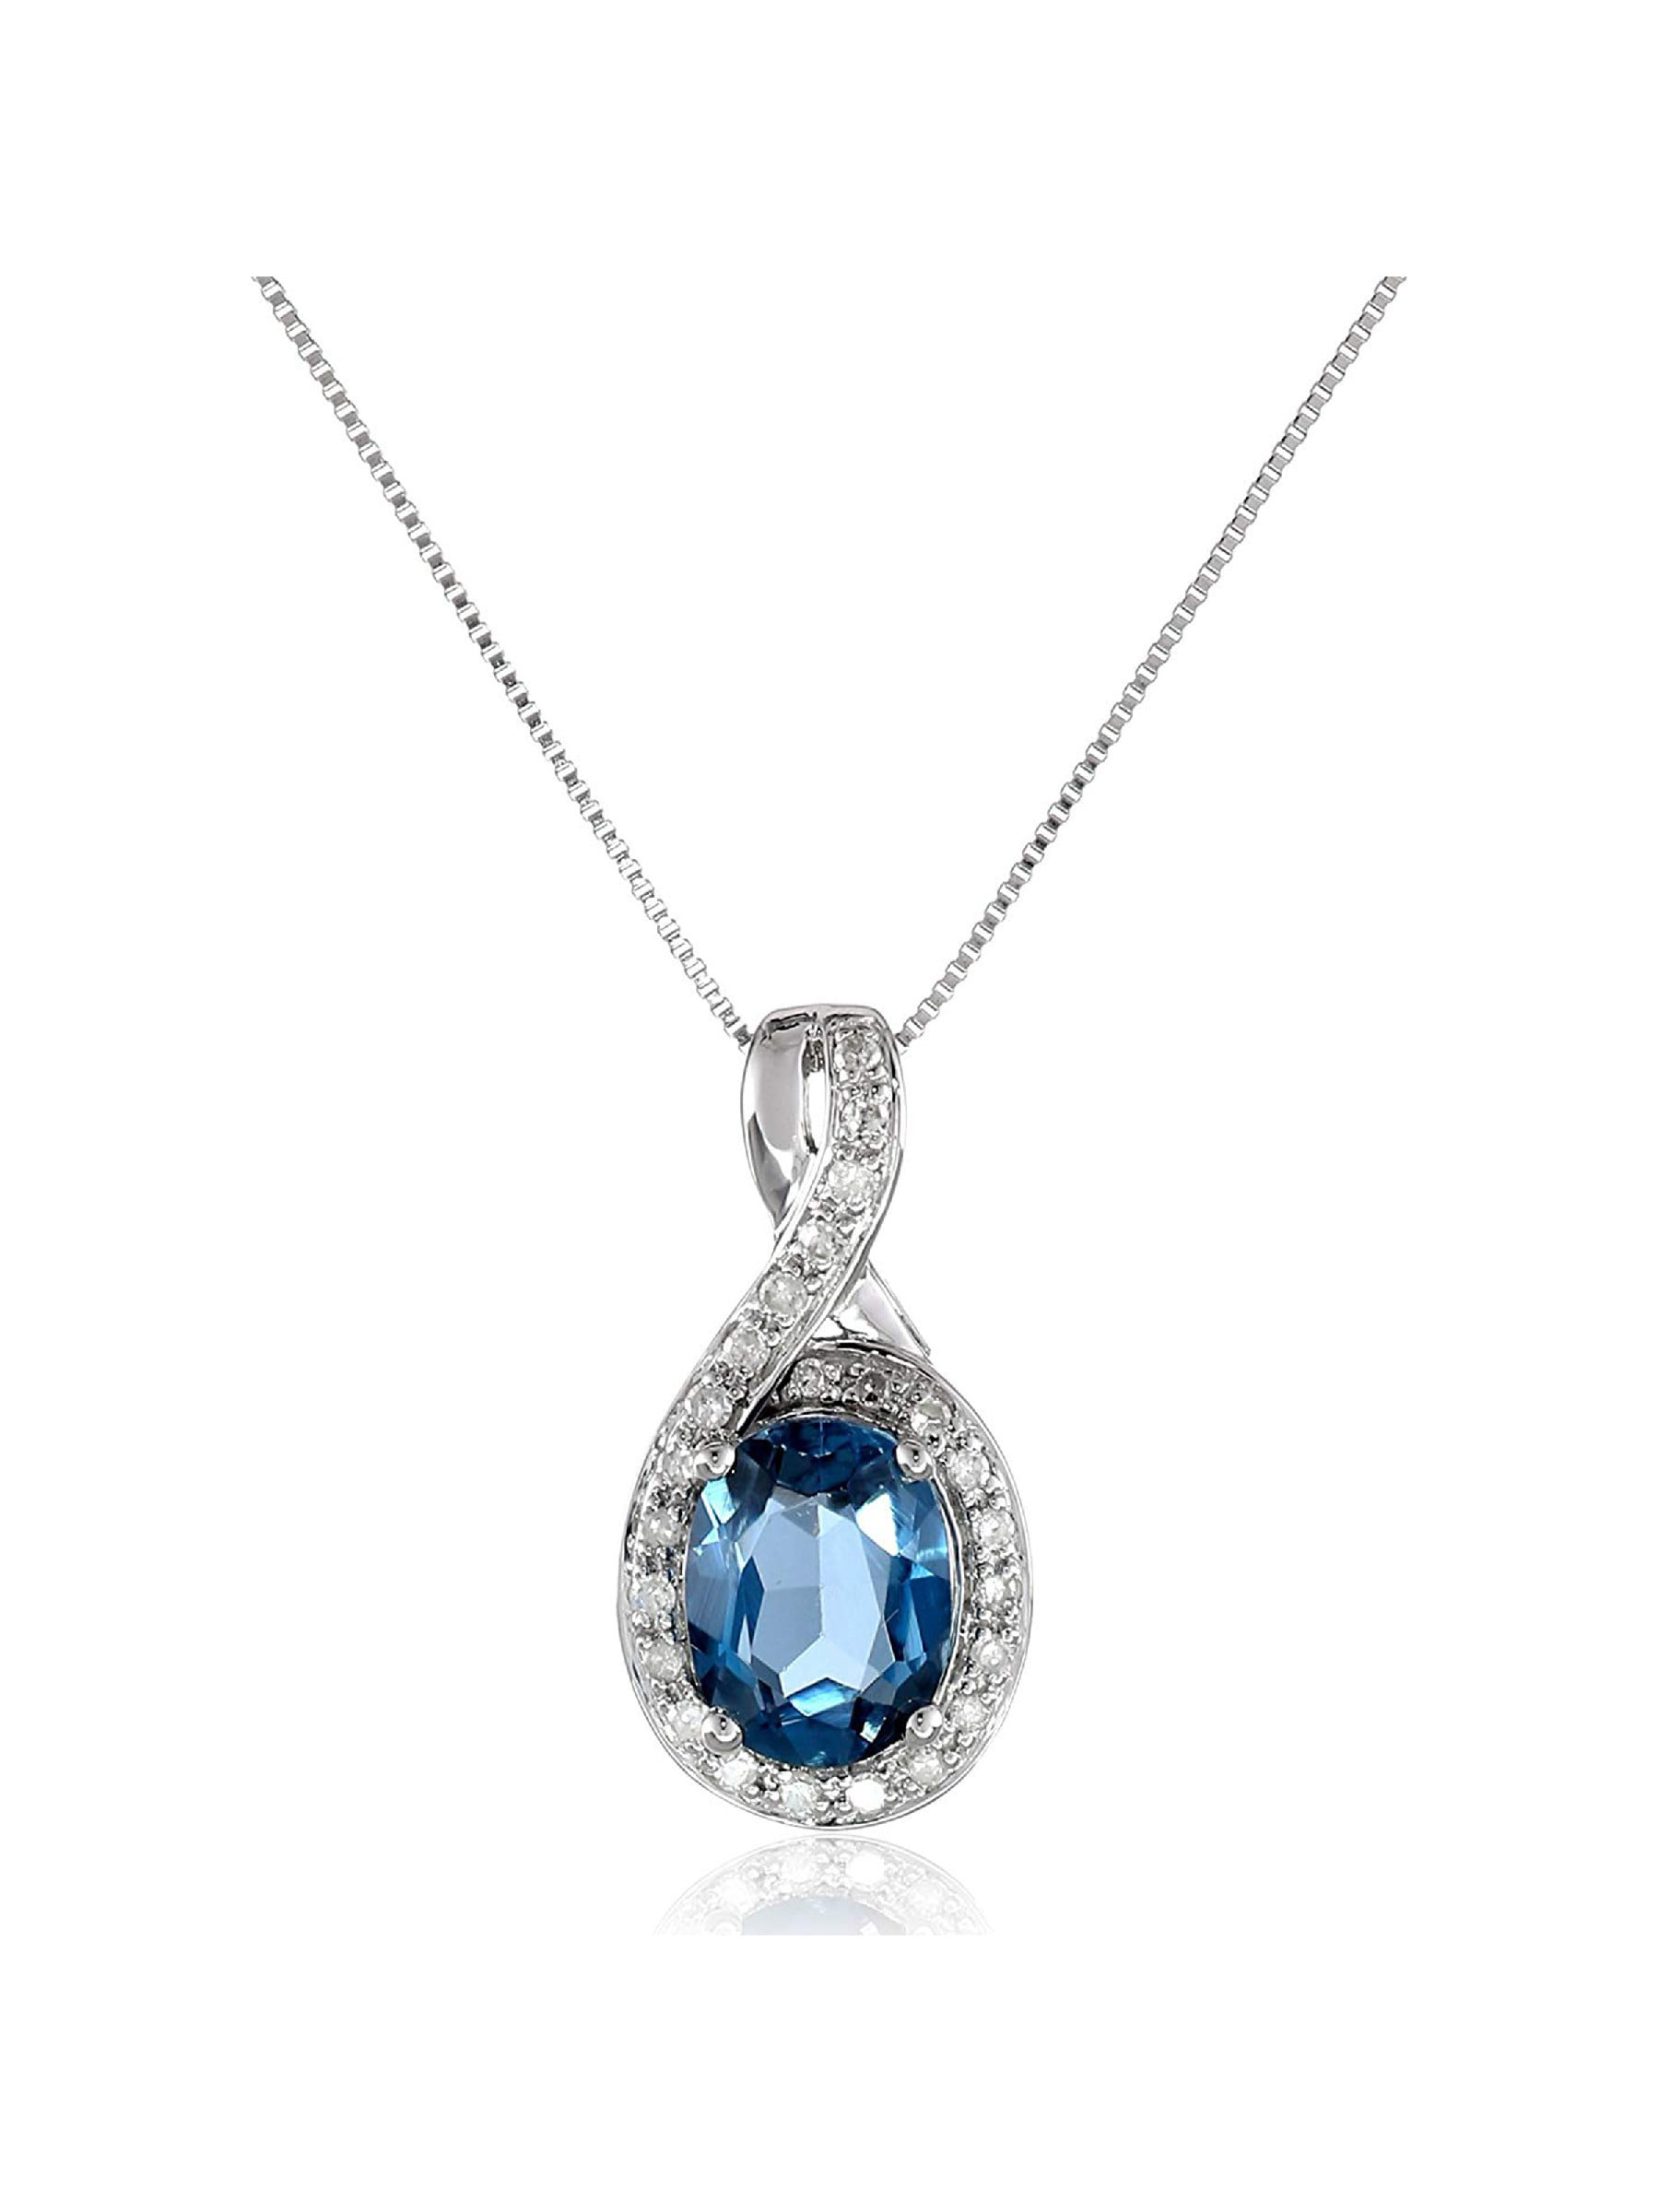 10K White Gold Natural Blue Topaz and Diamond Necklace with 18 inch chain